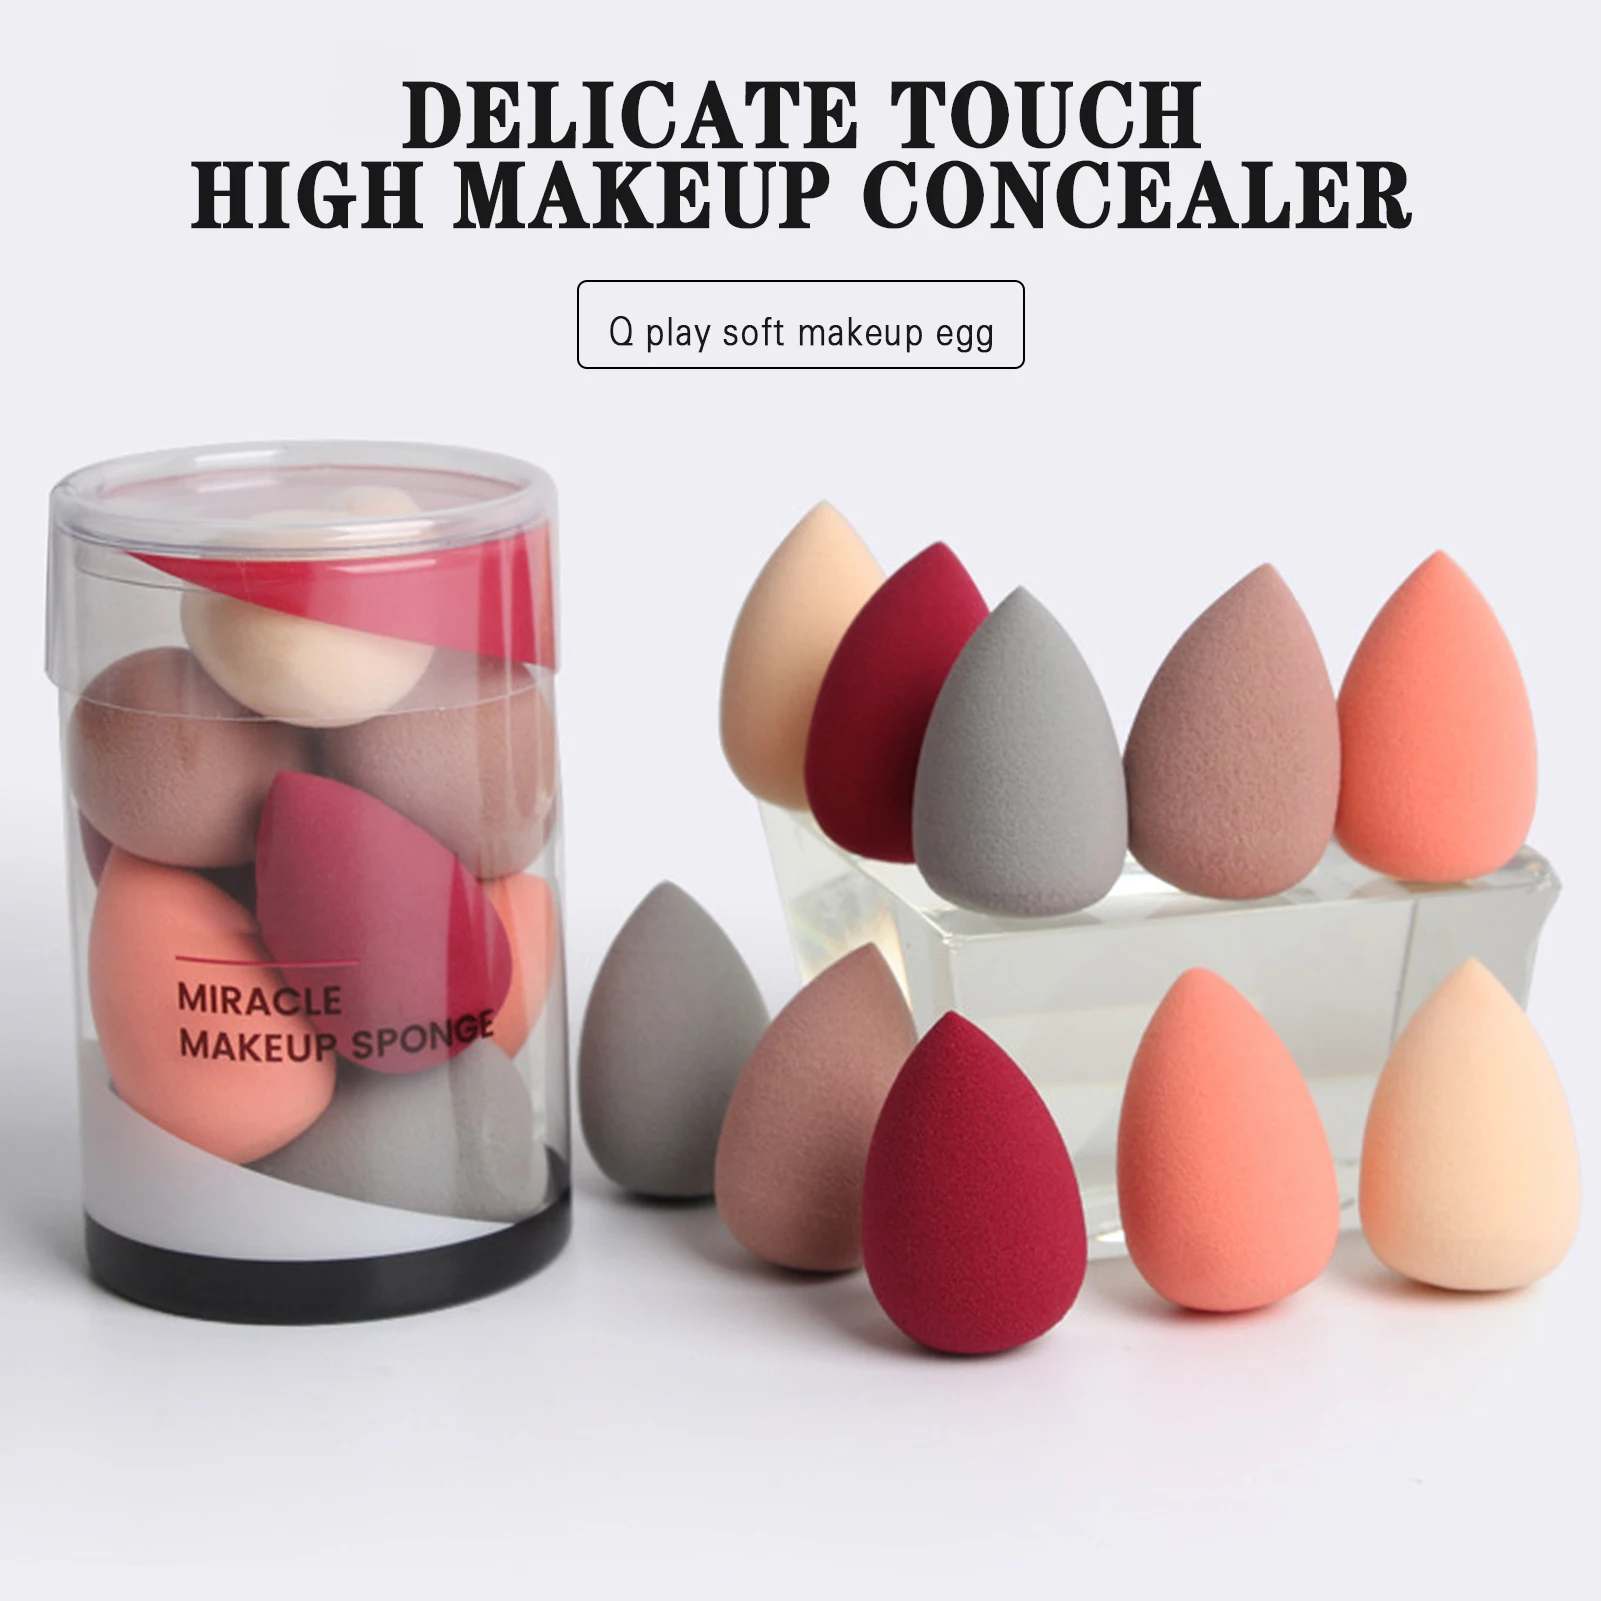 

10pcs Beauty Egg Washable Canned Mini Puff Makeup Eggs Powder Puff Reusable Dry/wet Use Air Cushion Puff For Liquid Foundation